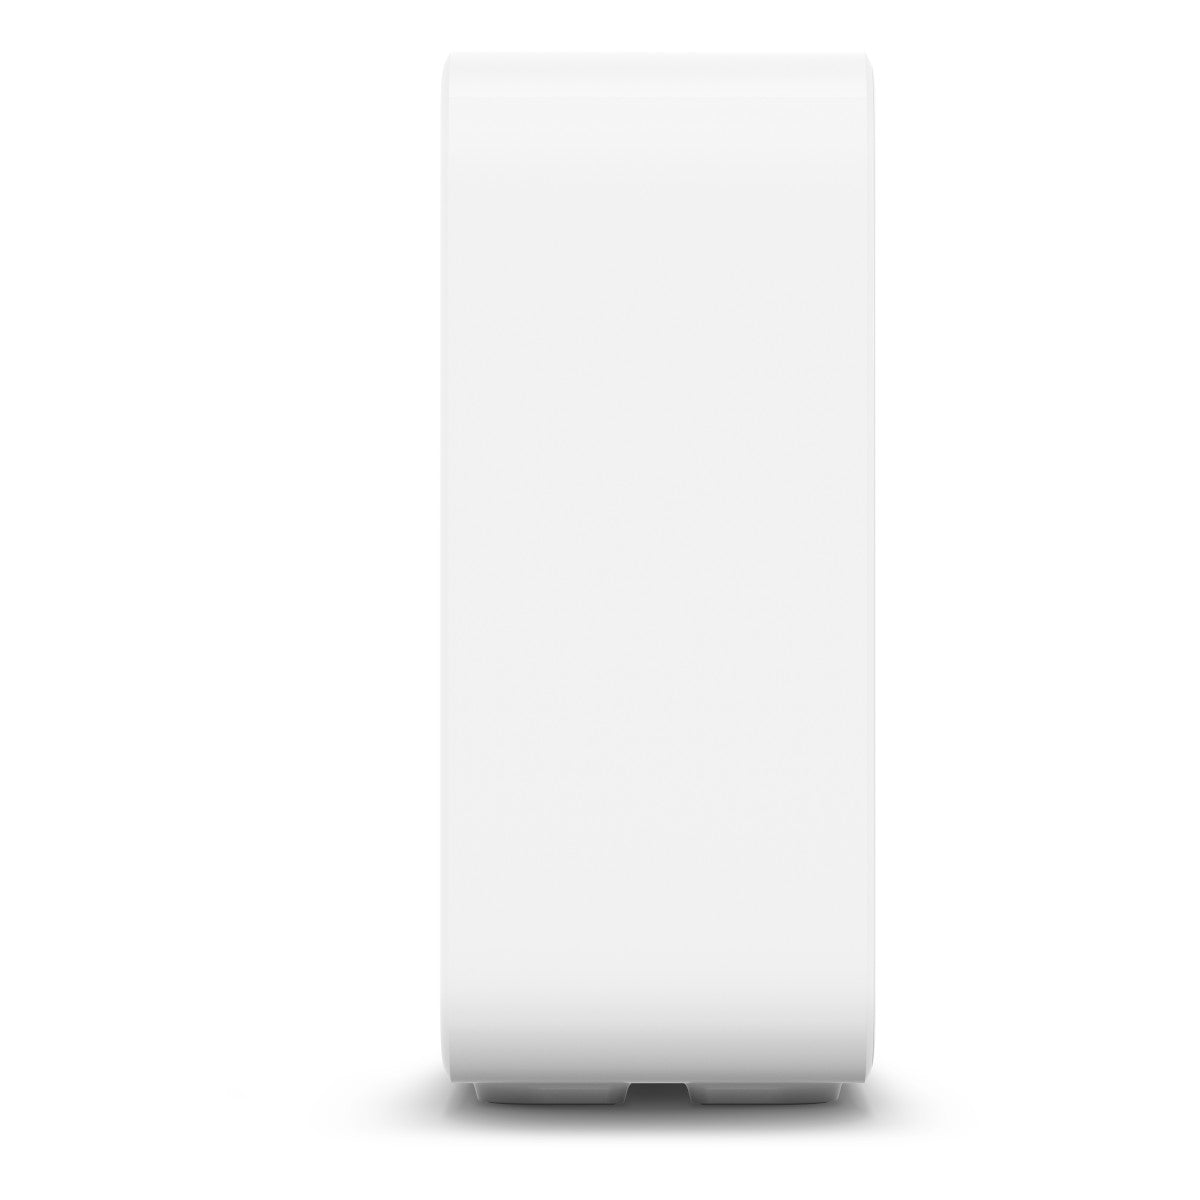 Sonos Amp Wireless Hi-Fi Player with Pair of Sub (Gen 3) Wireless Subwoofer (White)